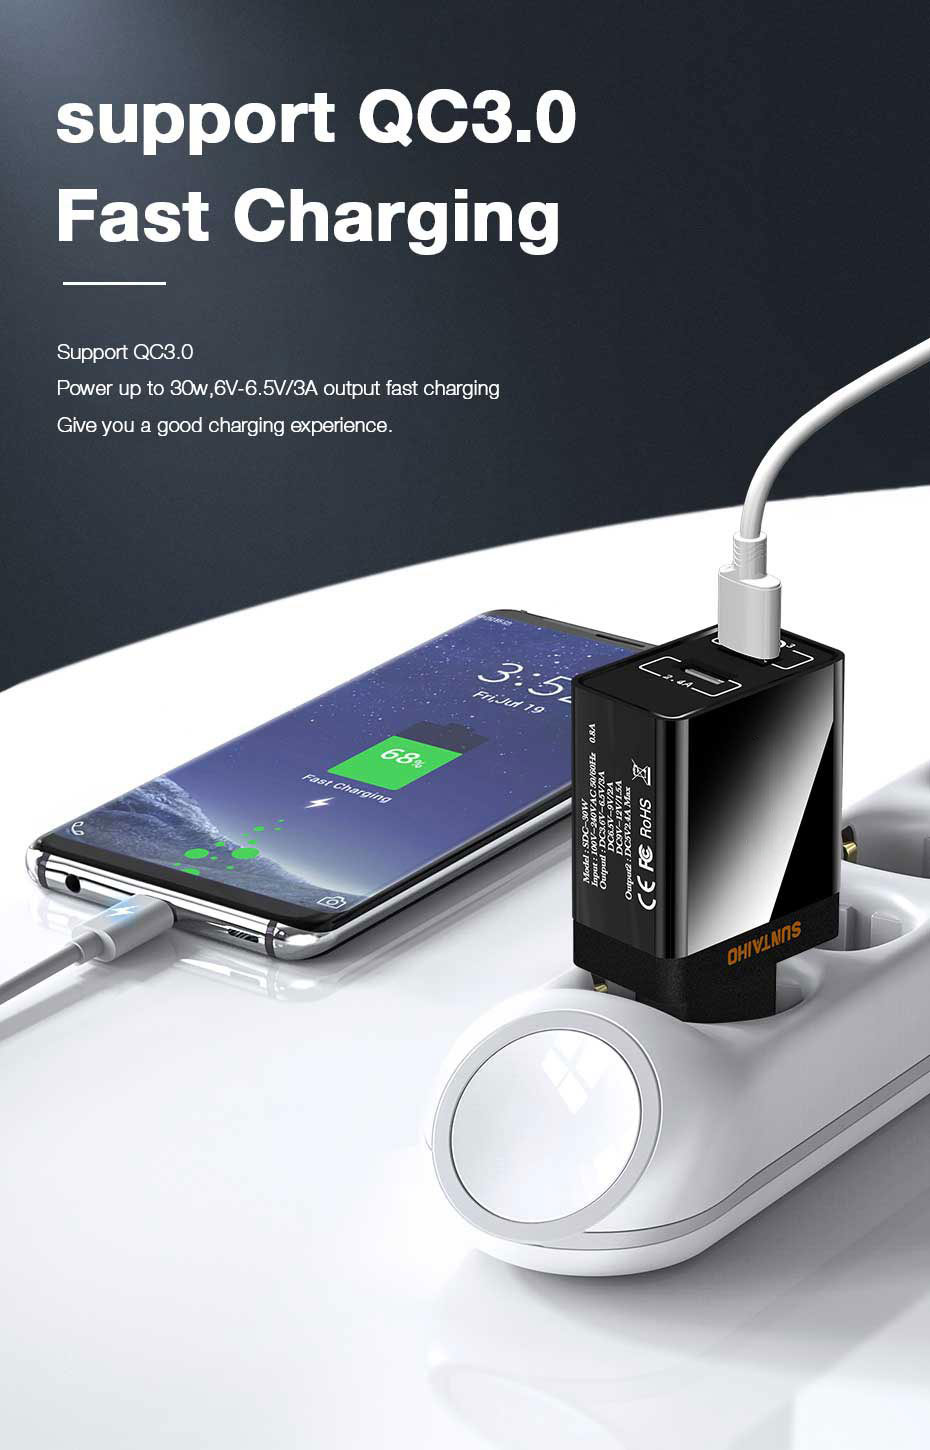 Suntaiho-USB-Charger-30W-QC-30-Universal-Wall-Adapter-Dual-USB-Charger-Fast-Charging-For-iPhone-XS-1-1699509